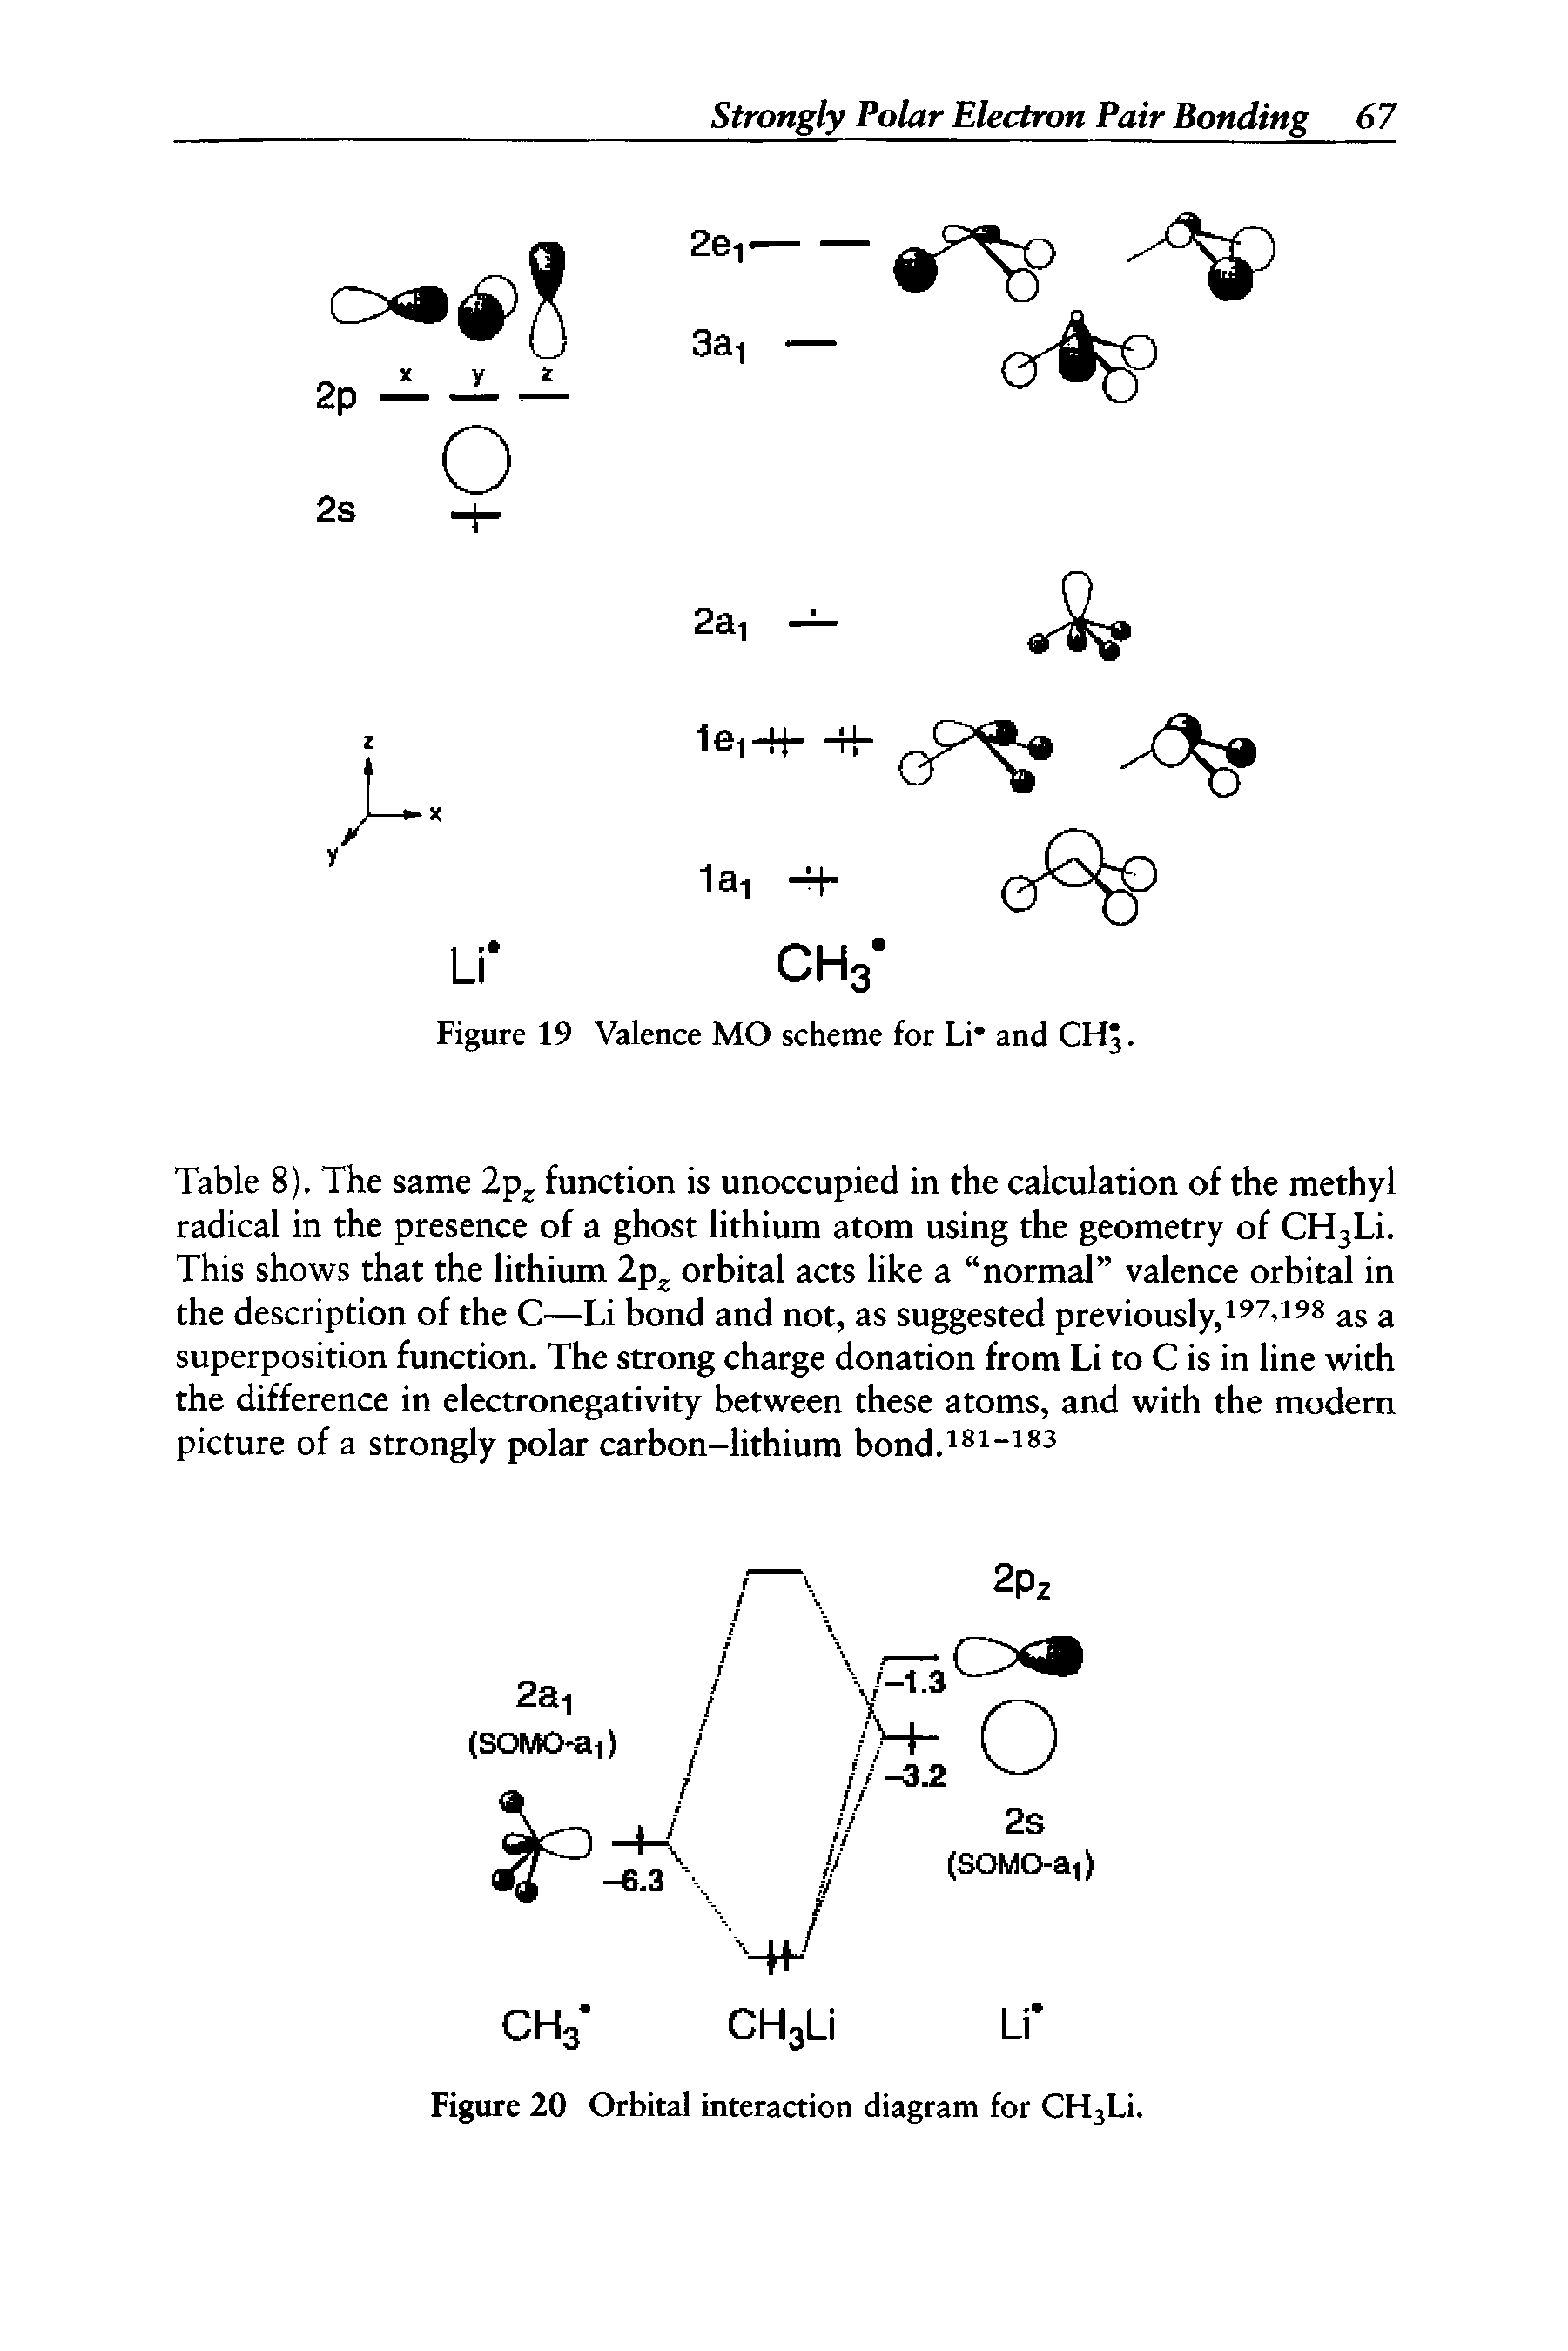 Table 8). The same 2pz function is unoccupied in the calculation of the methyl radical in the presence of a ghost lithium atom using the geometry of CH3Li. This shows that the lithium 2pz orbital acts like a normal valence orbital in the description of the C—Li bond and not, as suggested previously,197 198 as a superposition function. The strong charge donation from Li to C is in line with the difference in electronegativity between these atoms, and with the modern picture of a strongly polar carbon-lithium bond.181-183...